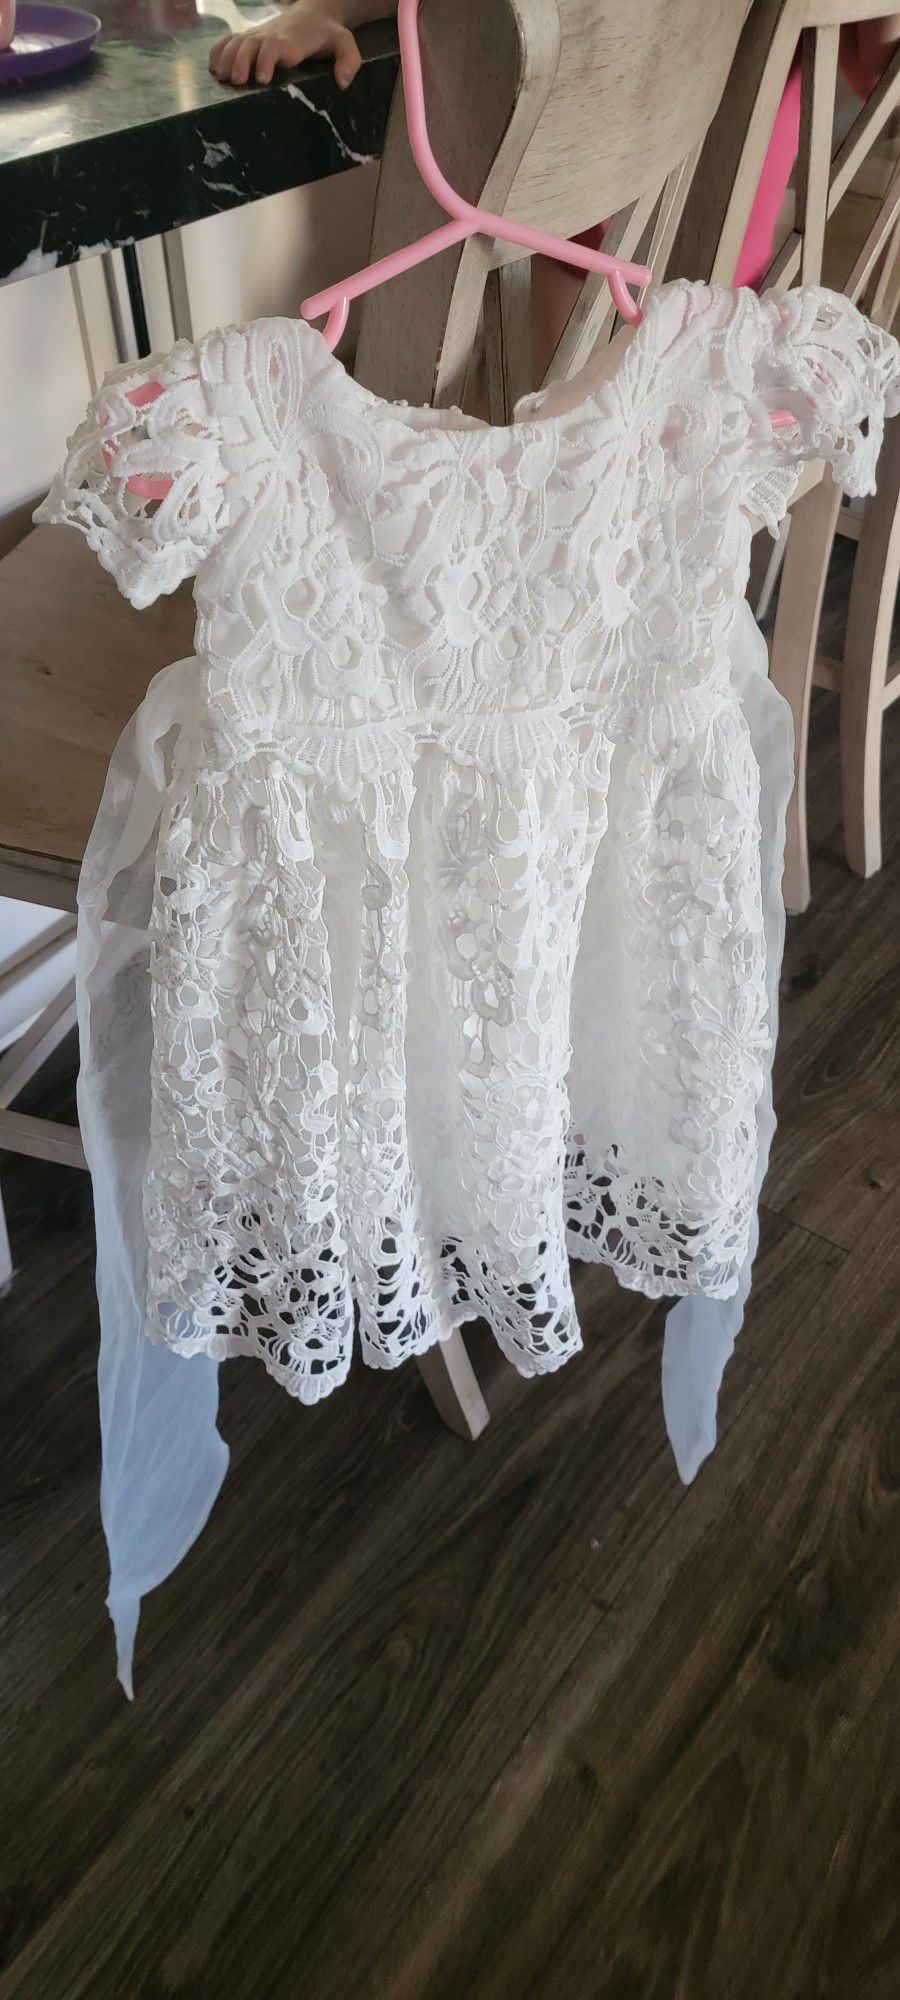 White Baby Baptism/wedding Dress 3 To 6 Months